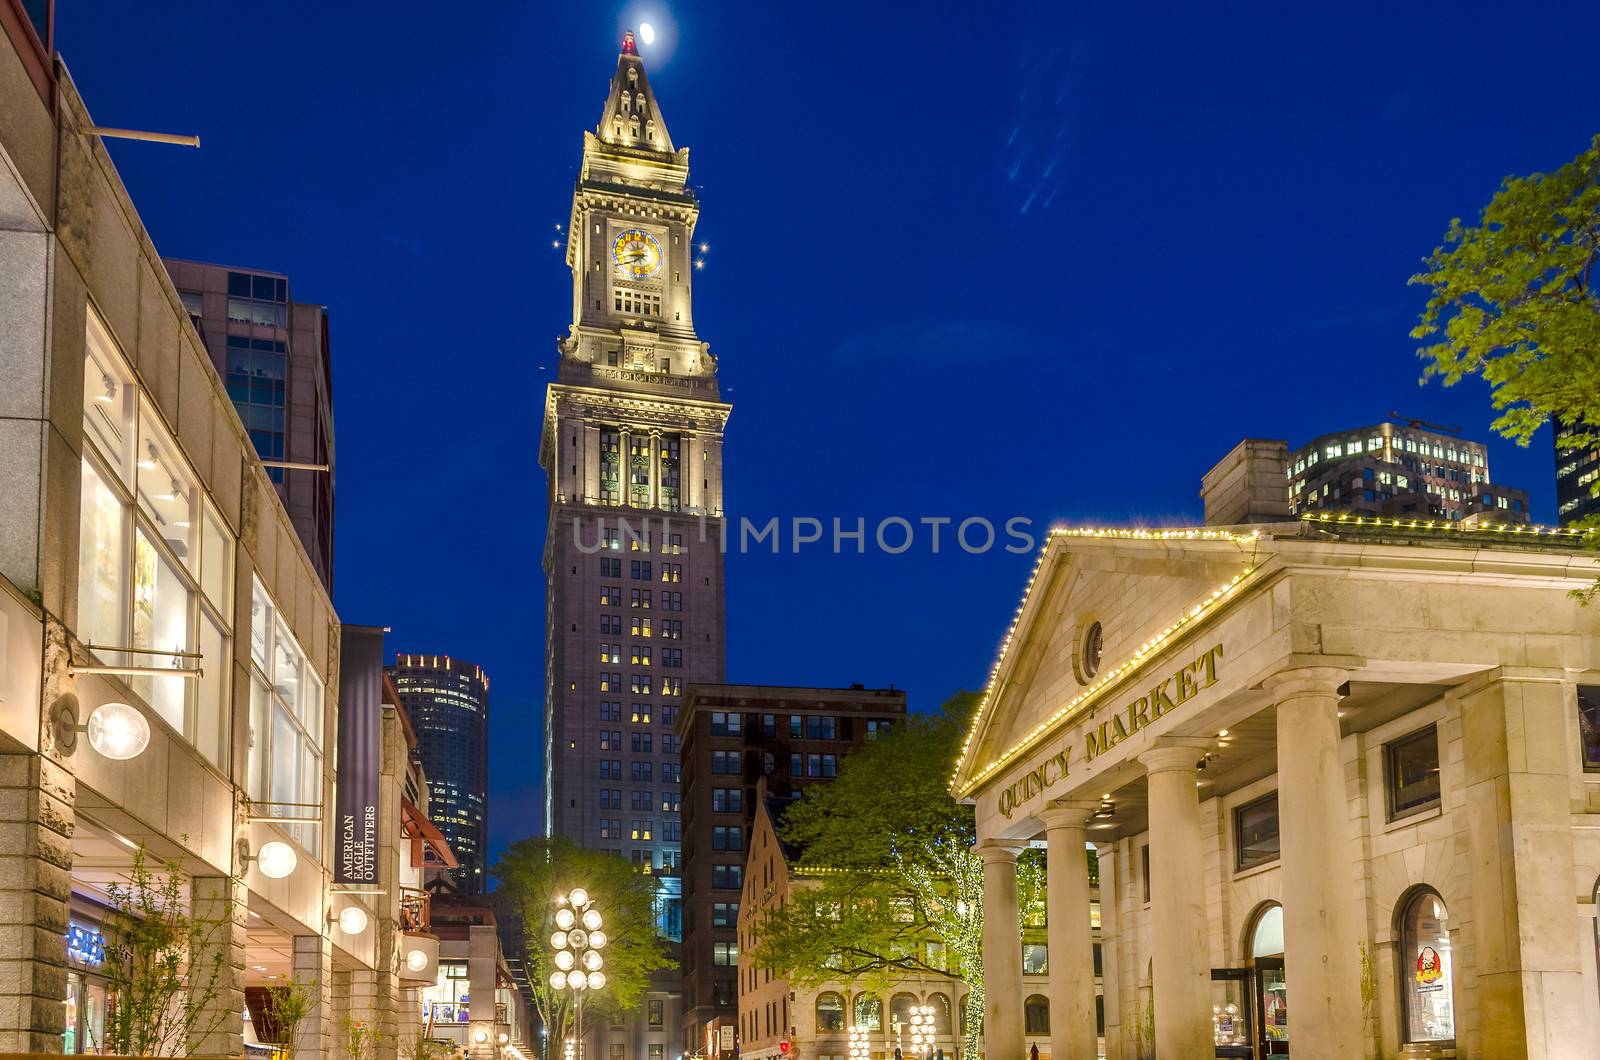 Custom House Tower and Quincy Market at night, Boston, USA